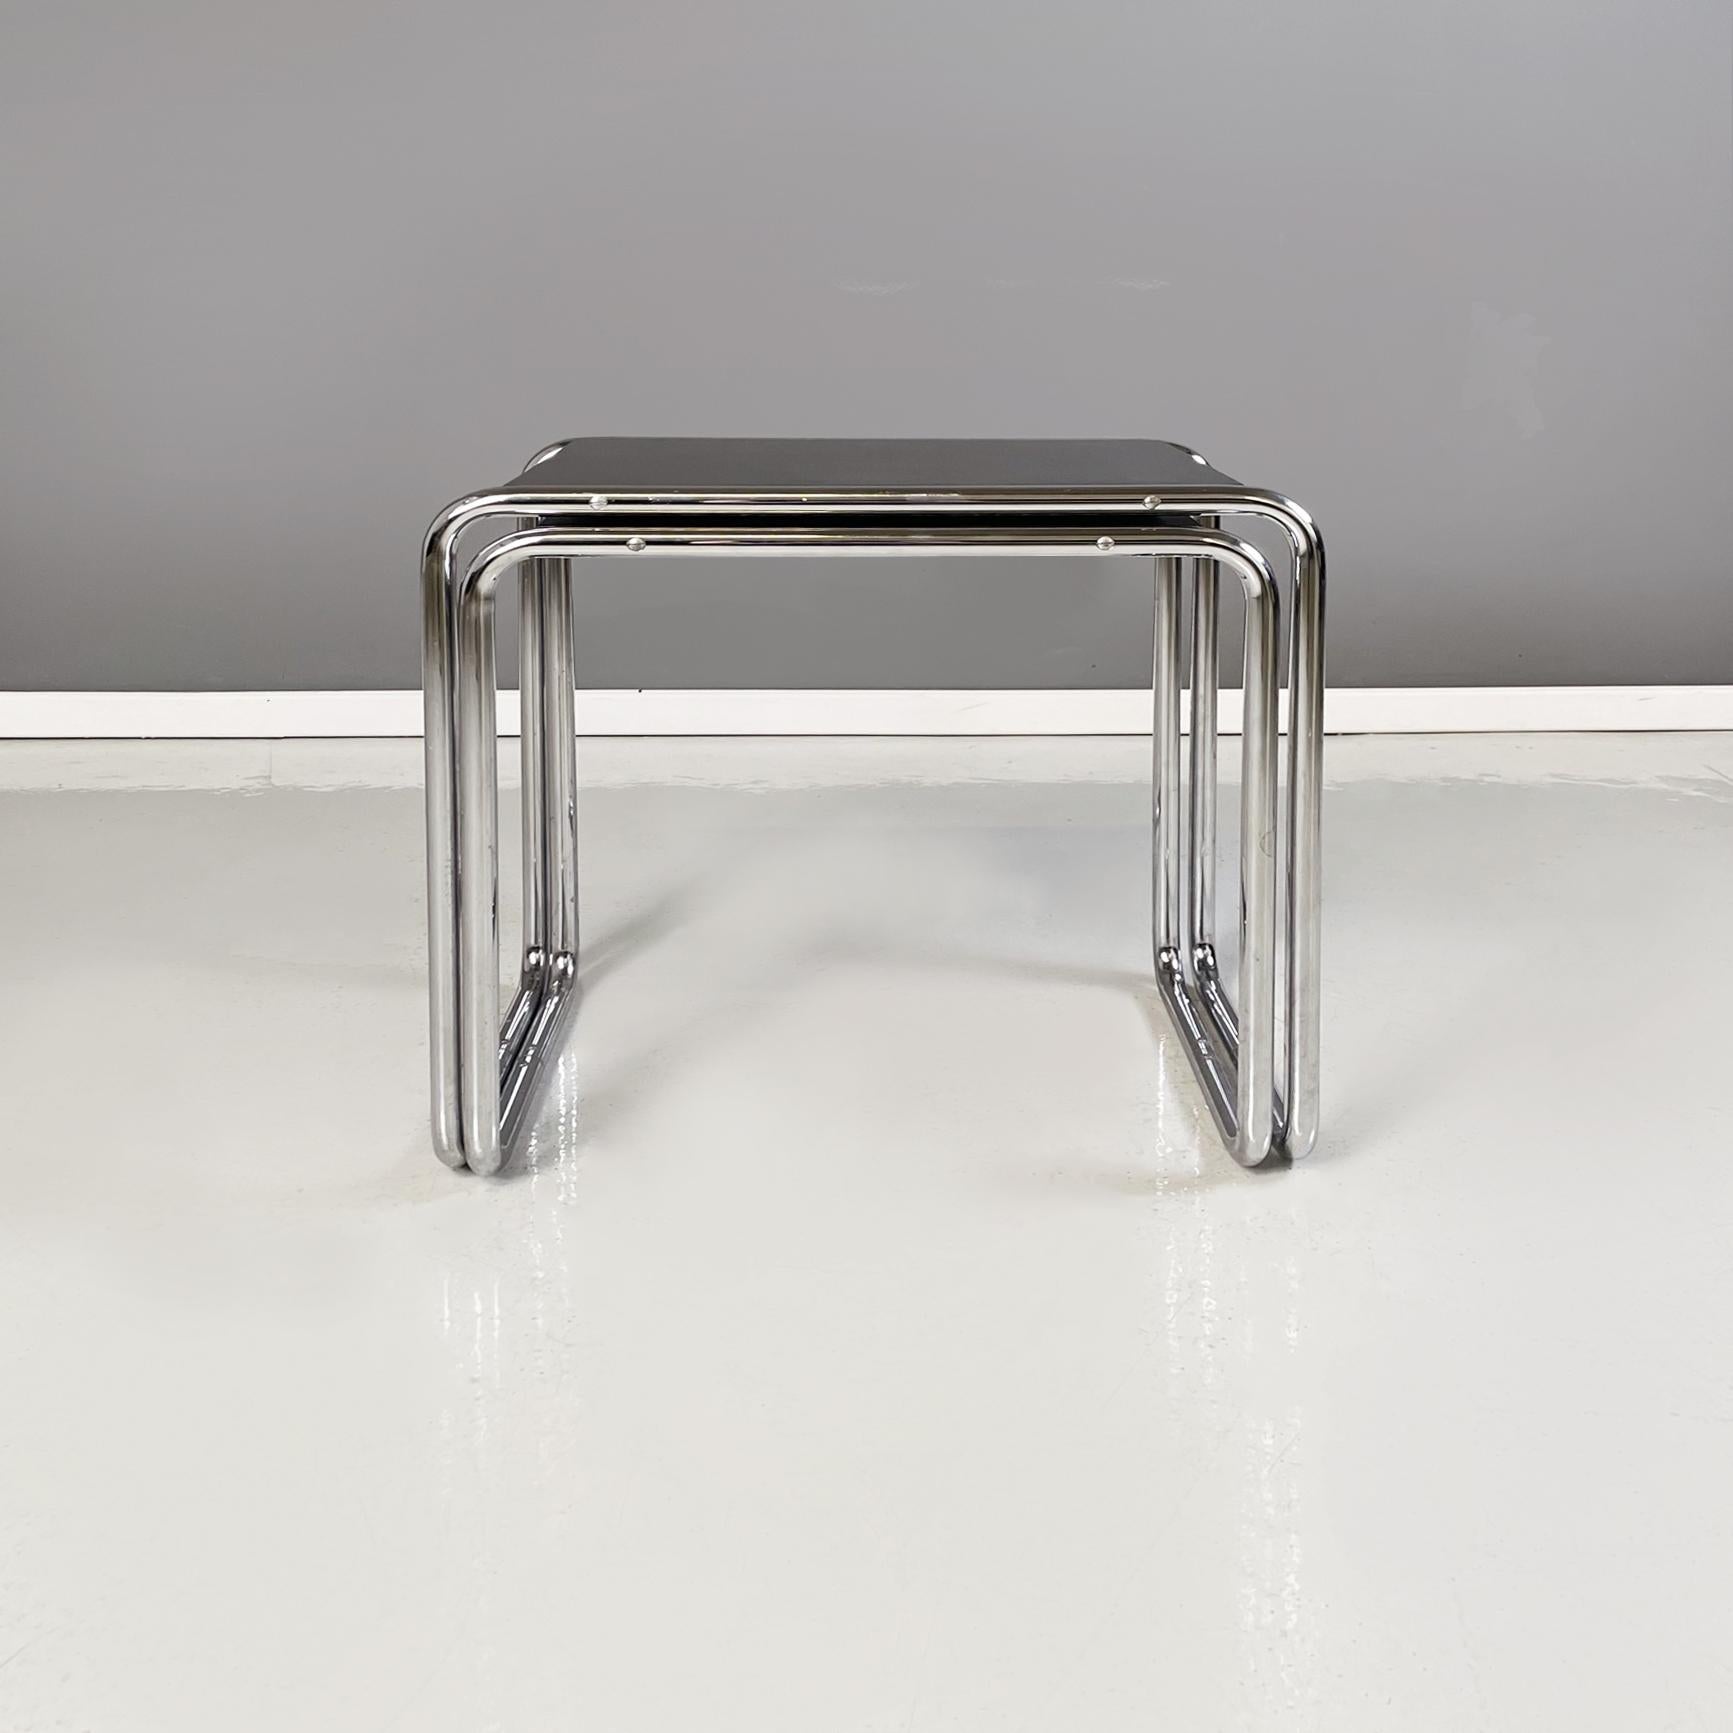 German Black Wood and Steel Coffee Tables by Arnold Bauhaus Collection, 1980s In Good Condition For Sale In MIlano, IT